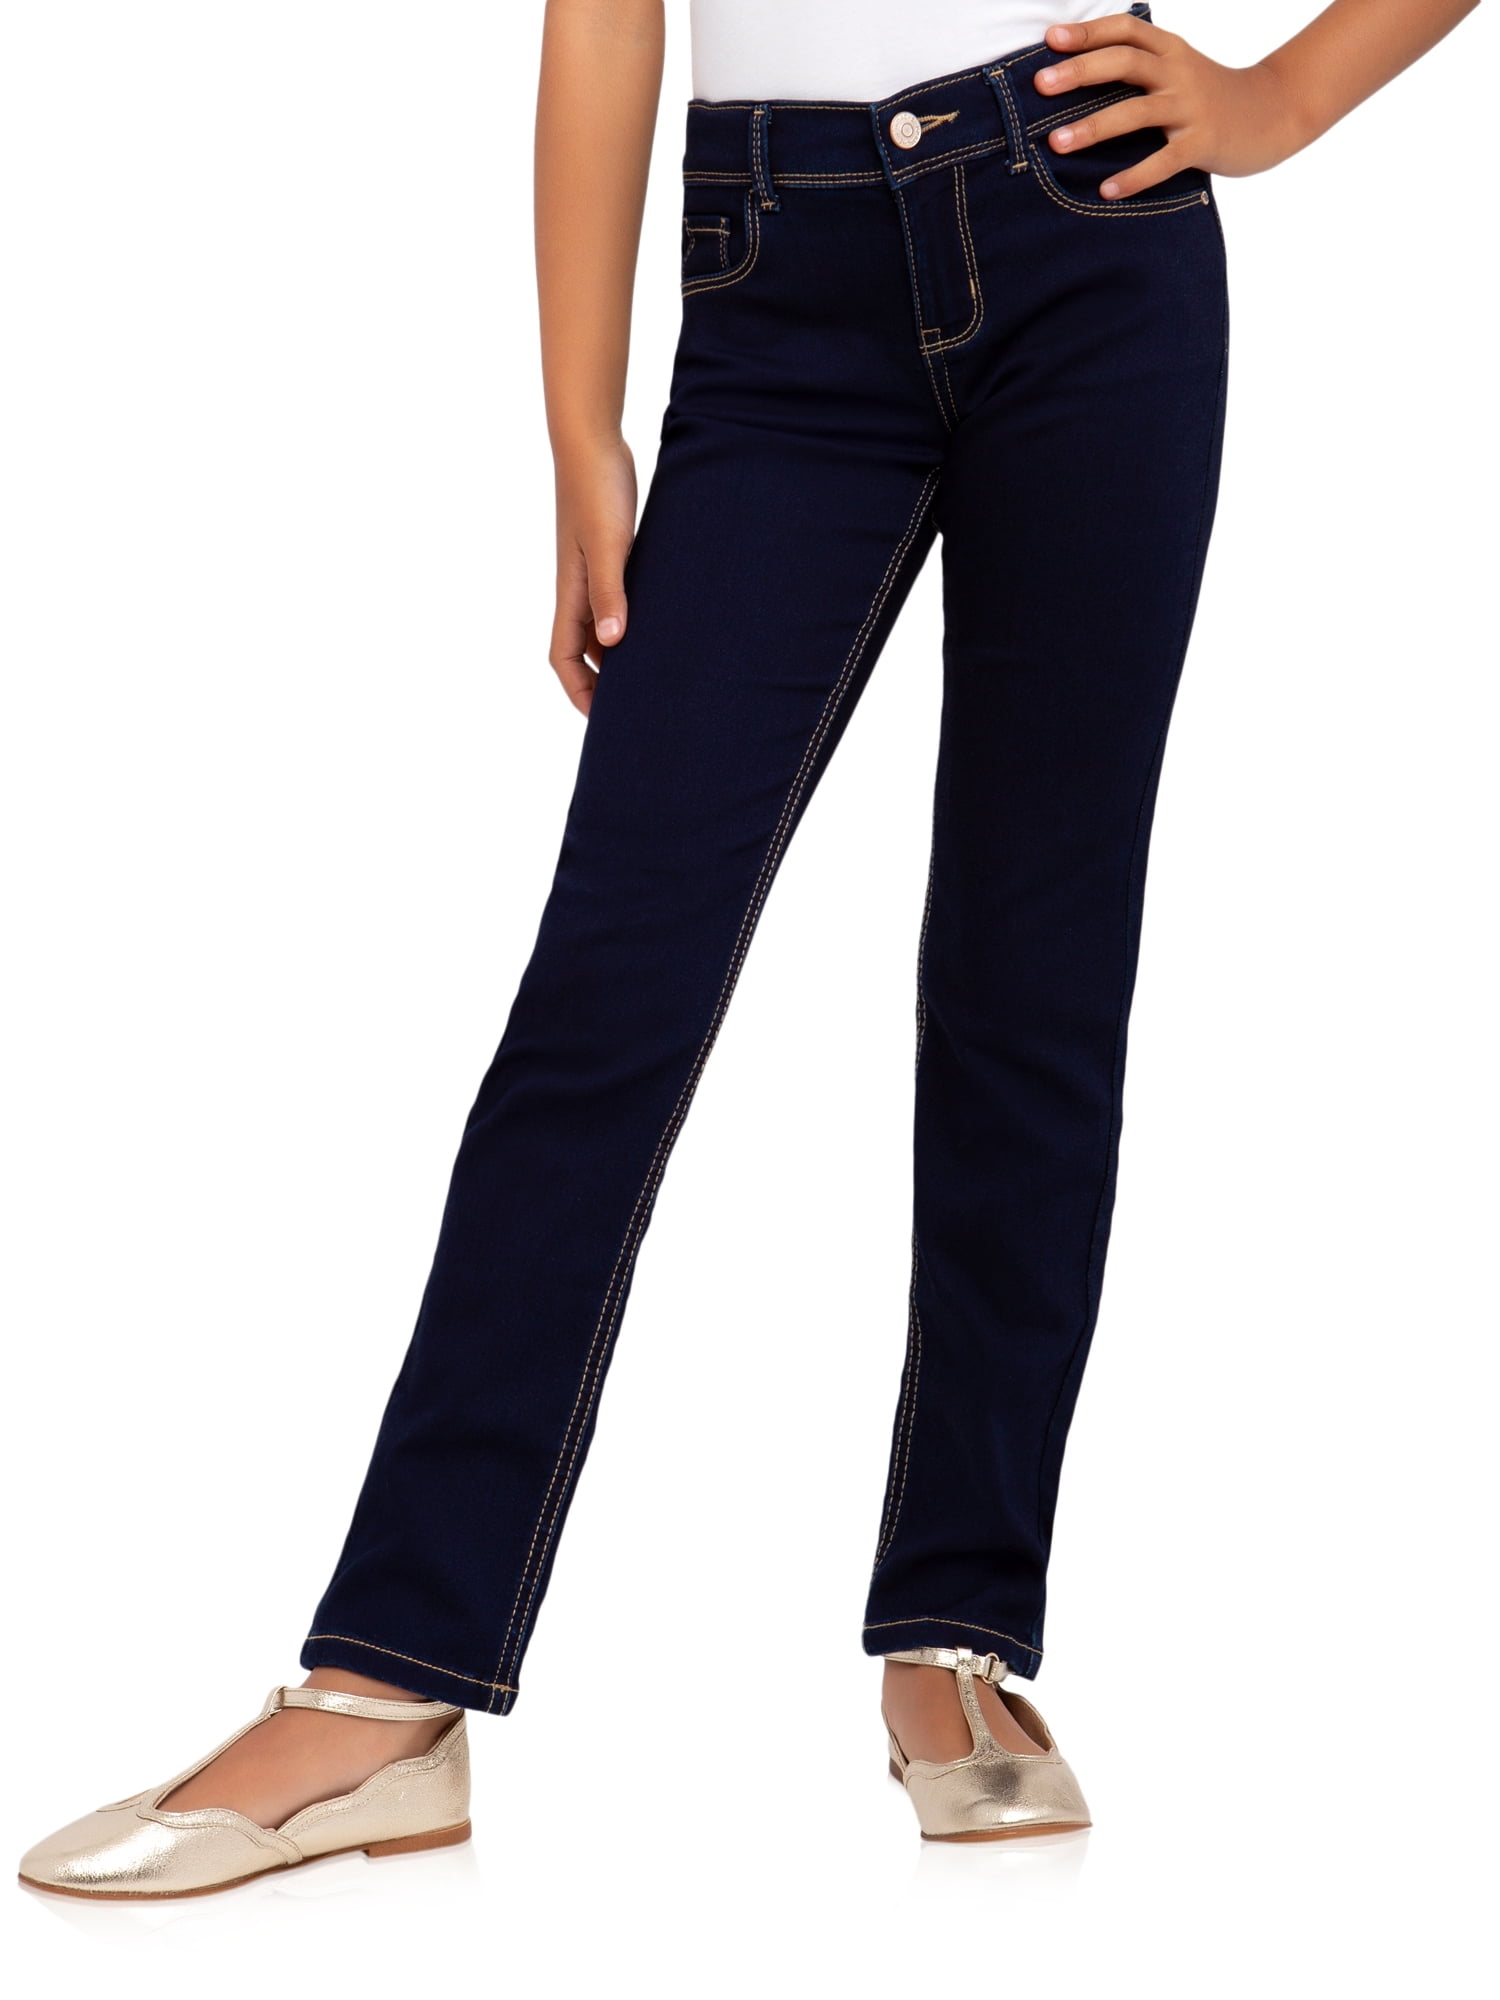 5 button jeans for girls